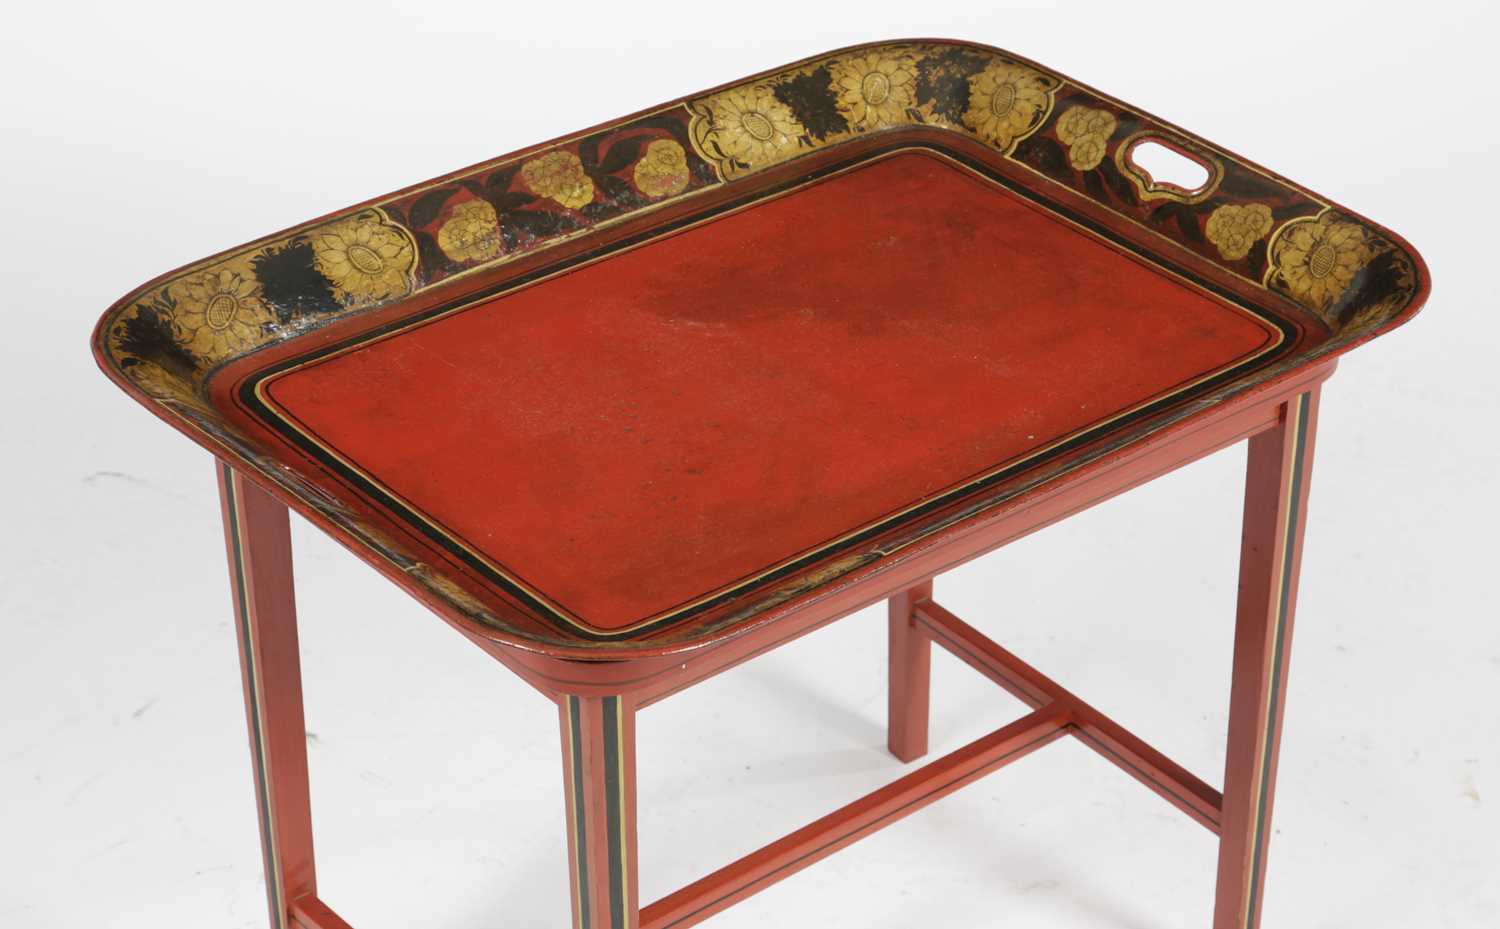 A REGENCY RED TÔLE PEINTE TRAY TABLE EARLY 19TH CENTURY AND LATER painted with a band of flowers and - Image 2 of 3